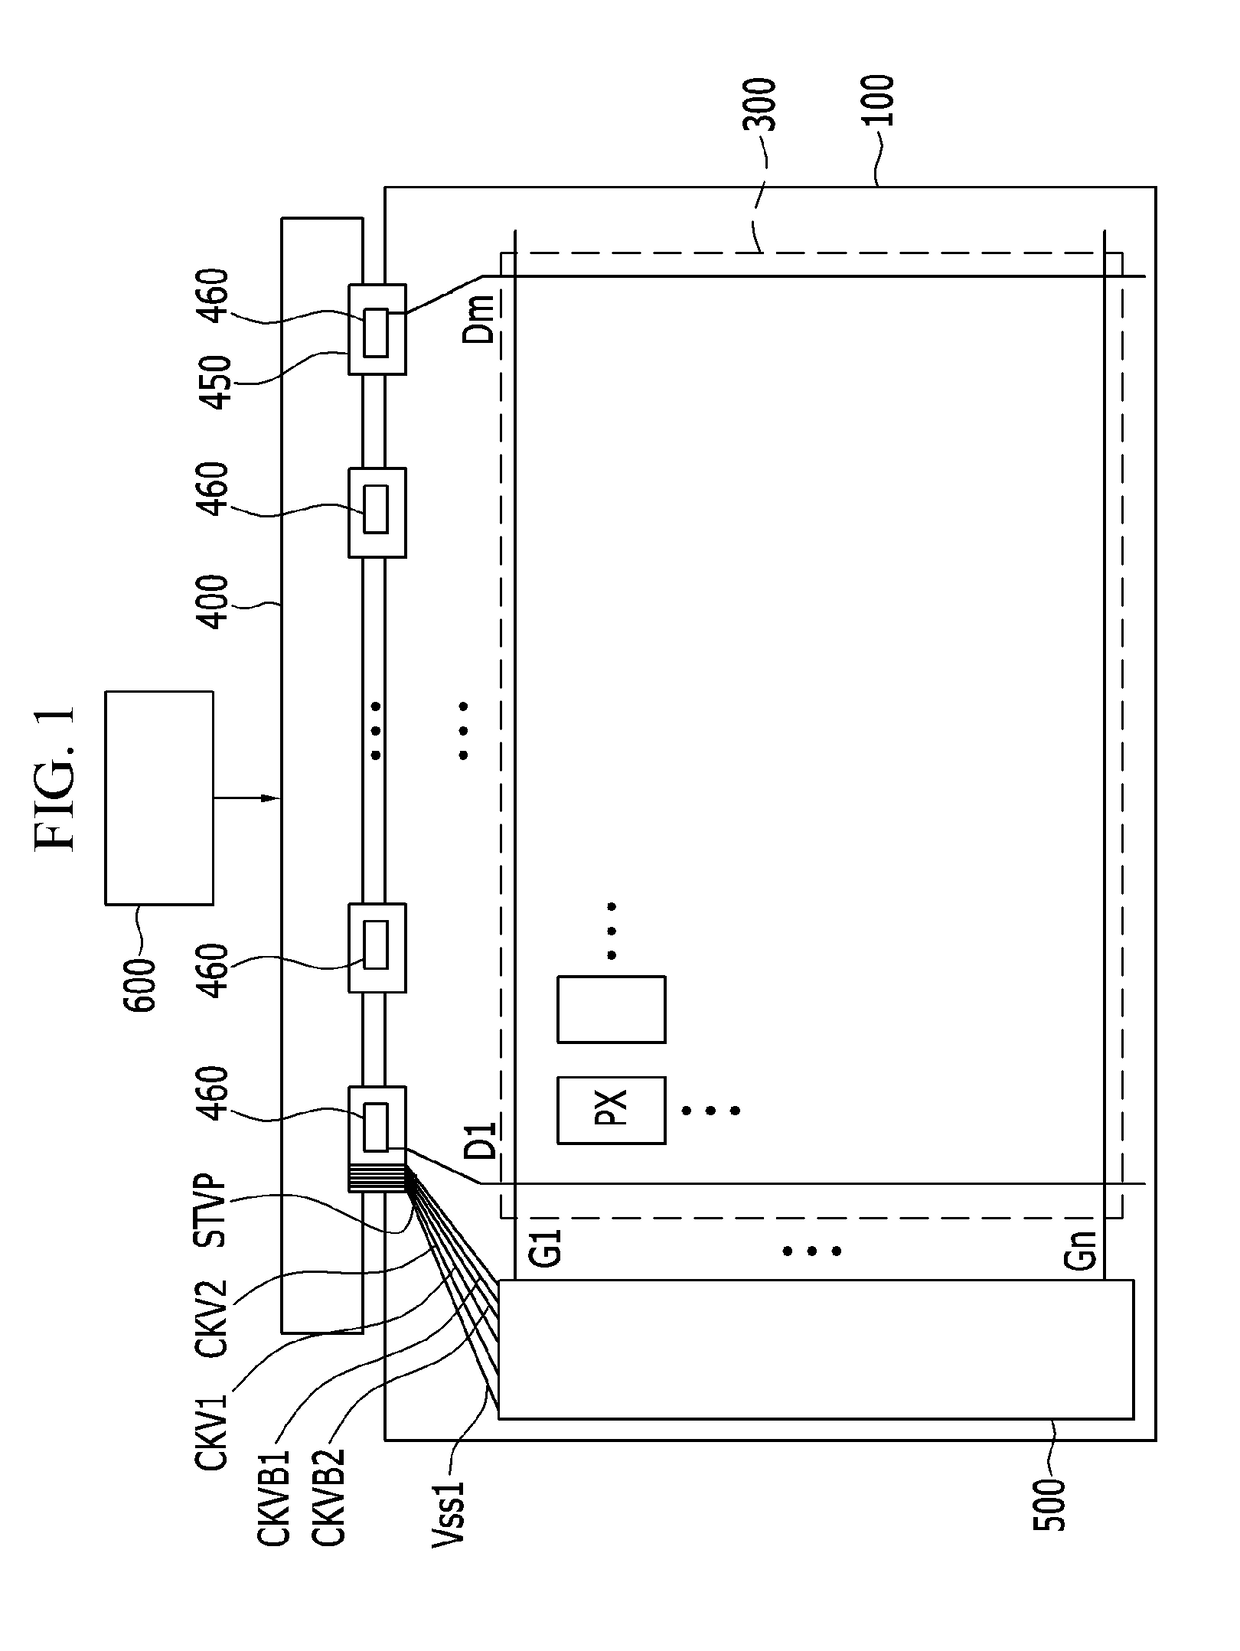 Display panel and gate driver with reduced power consumption